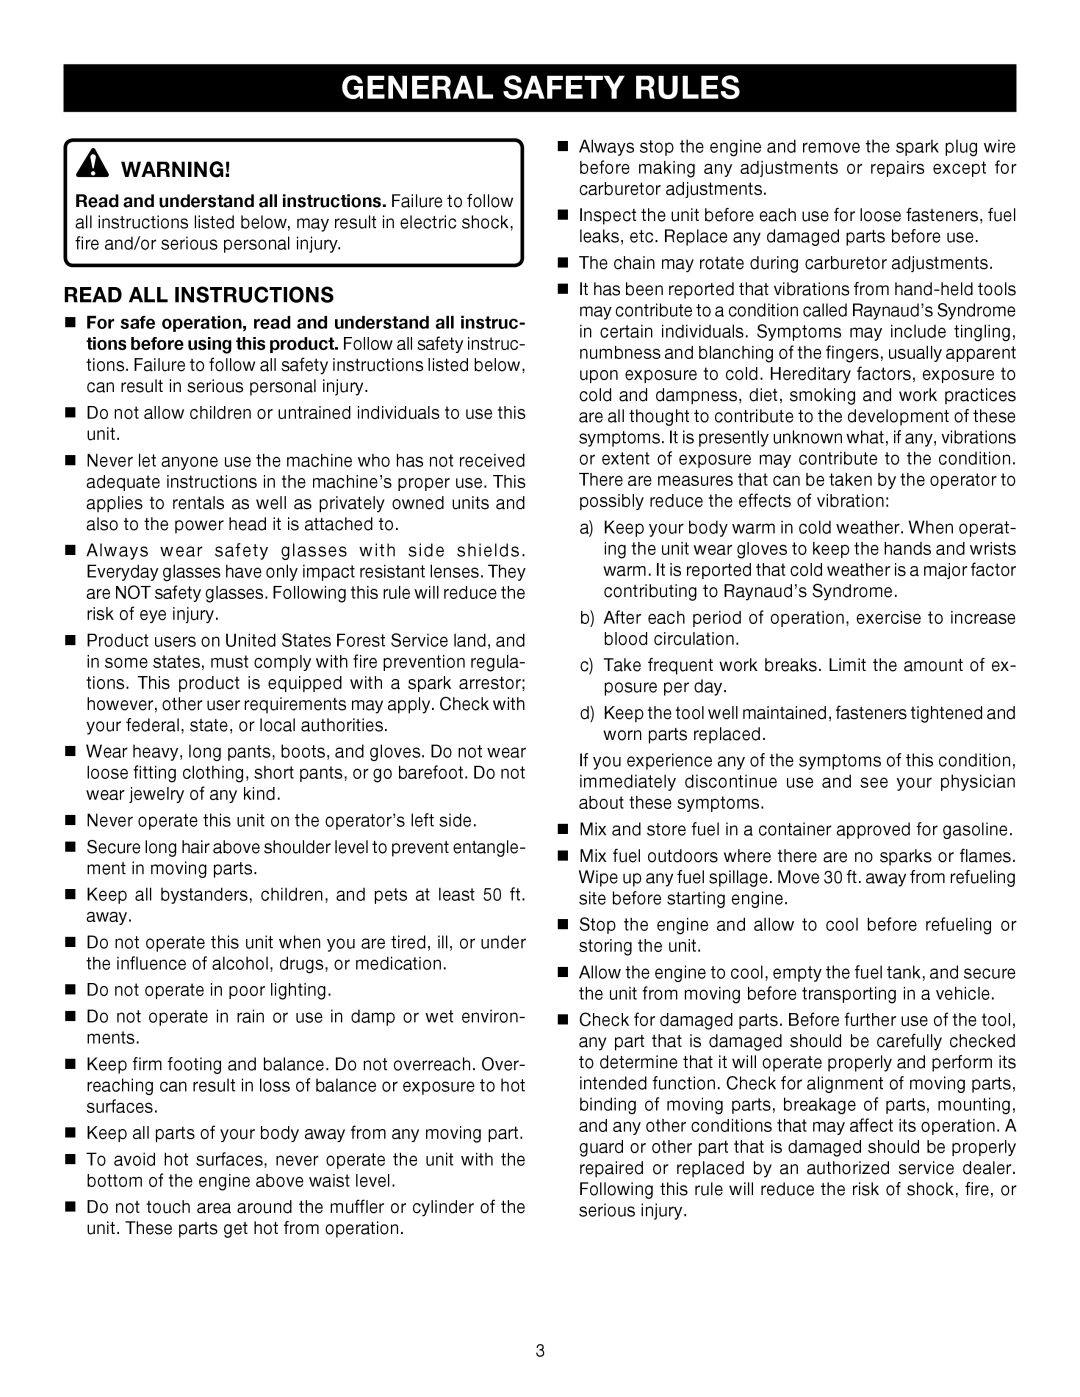 Ryobi RY52004 manual General Safety Rules, Read All Instructions 